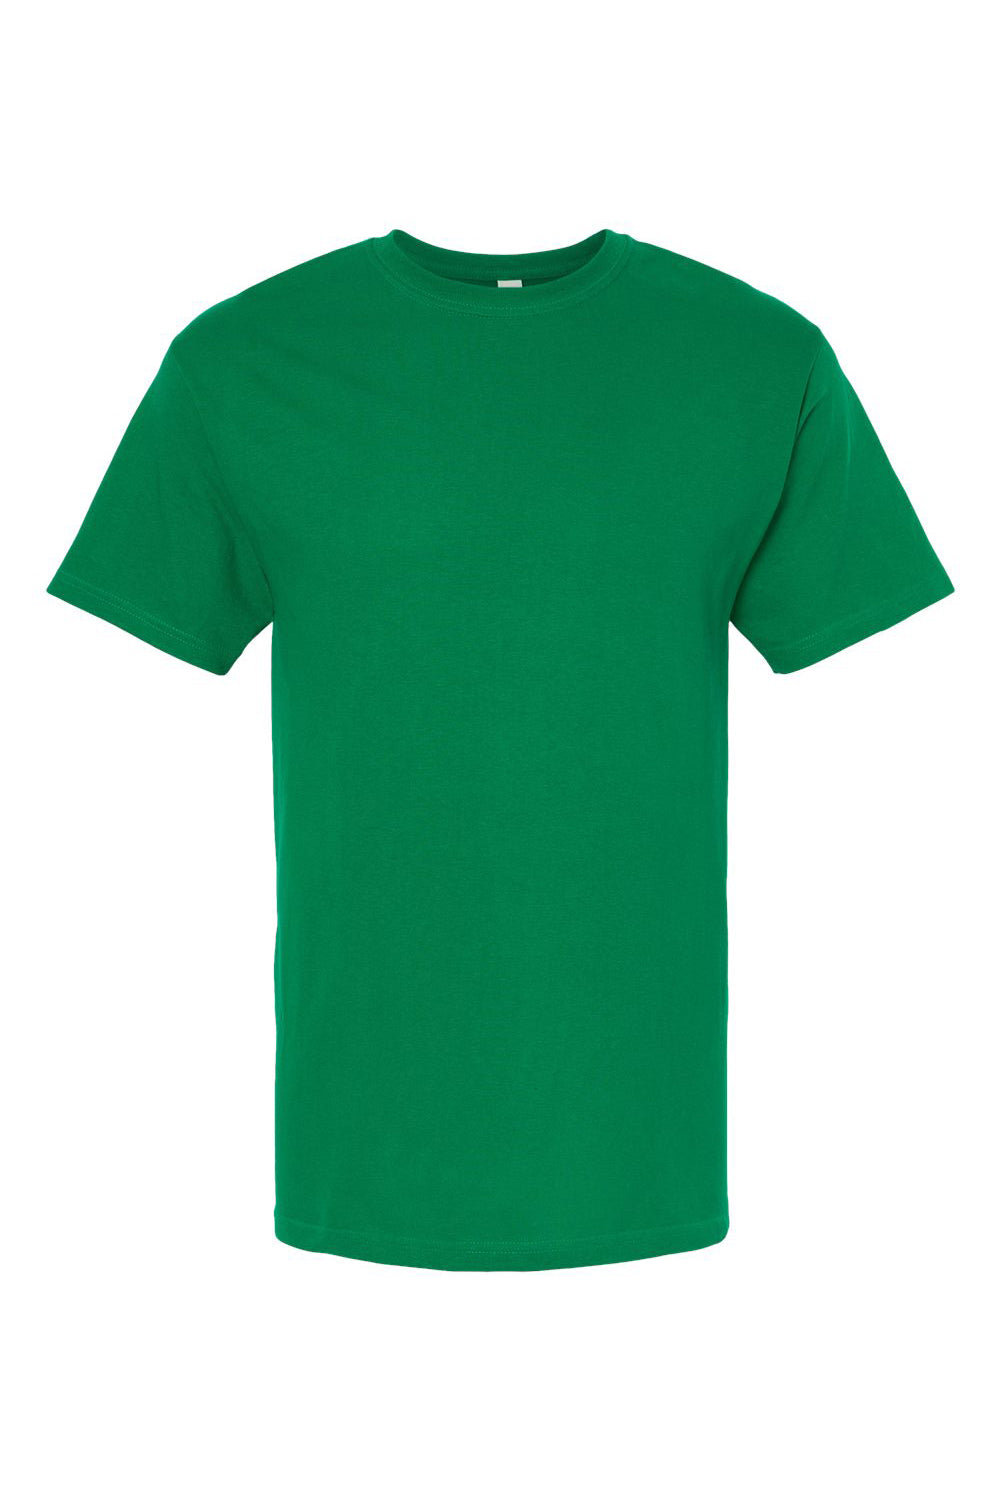 M&O 4800 Mens Gold Soft Touch Short Sleeve Crewneck T-Shirt Fine Kelly Green Flat Front